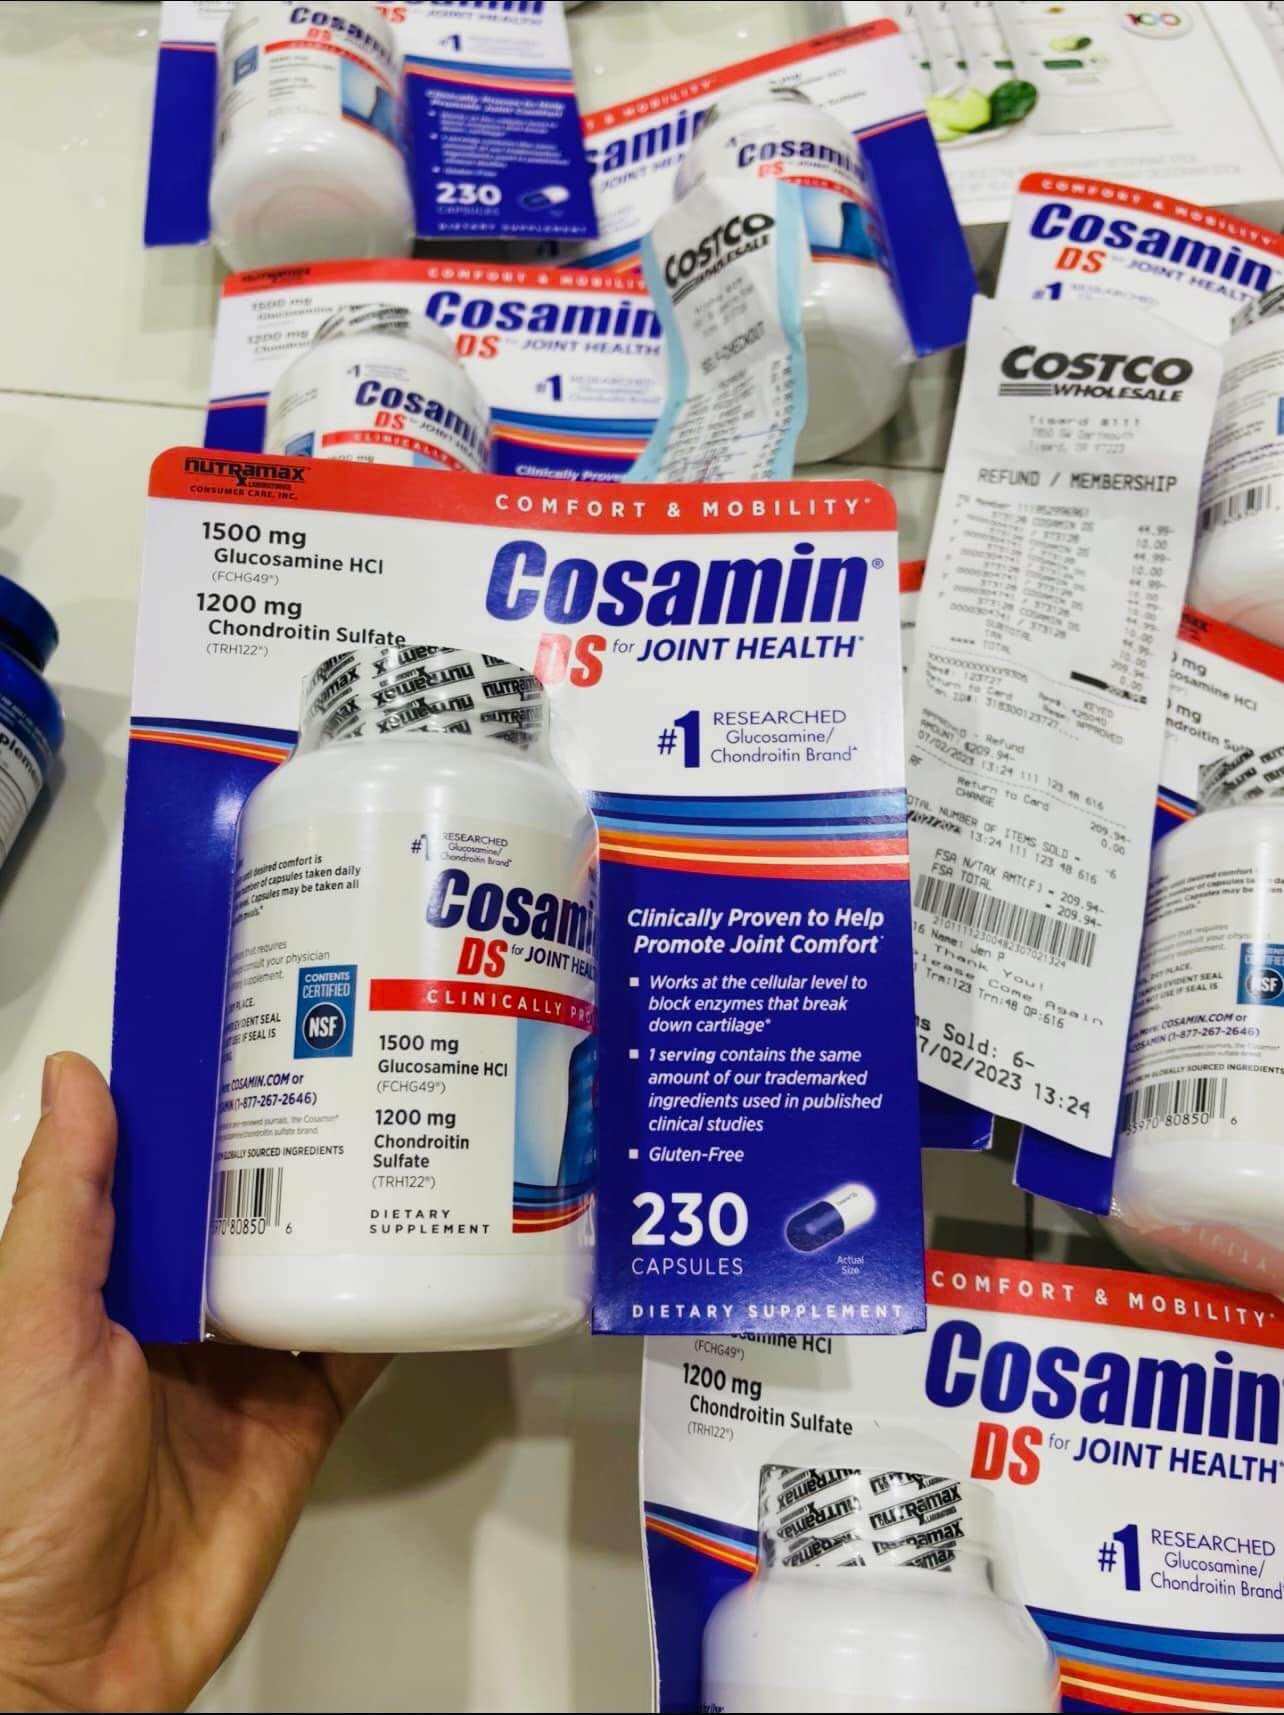 Cosamin DS For Joint Health 230 viên của Mỹ.